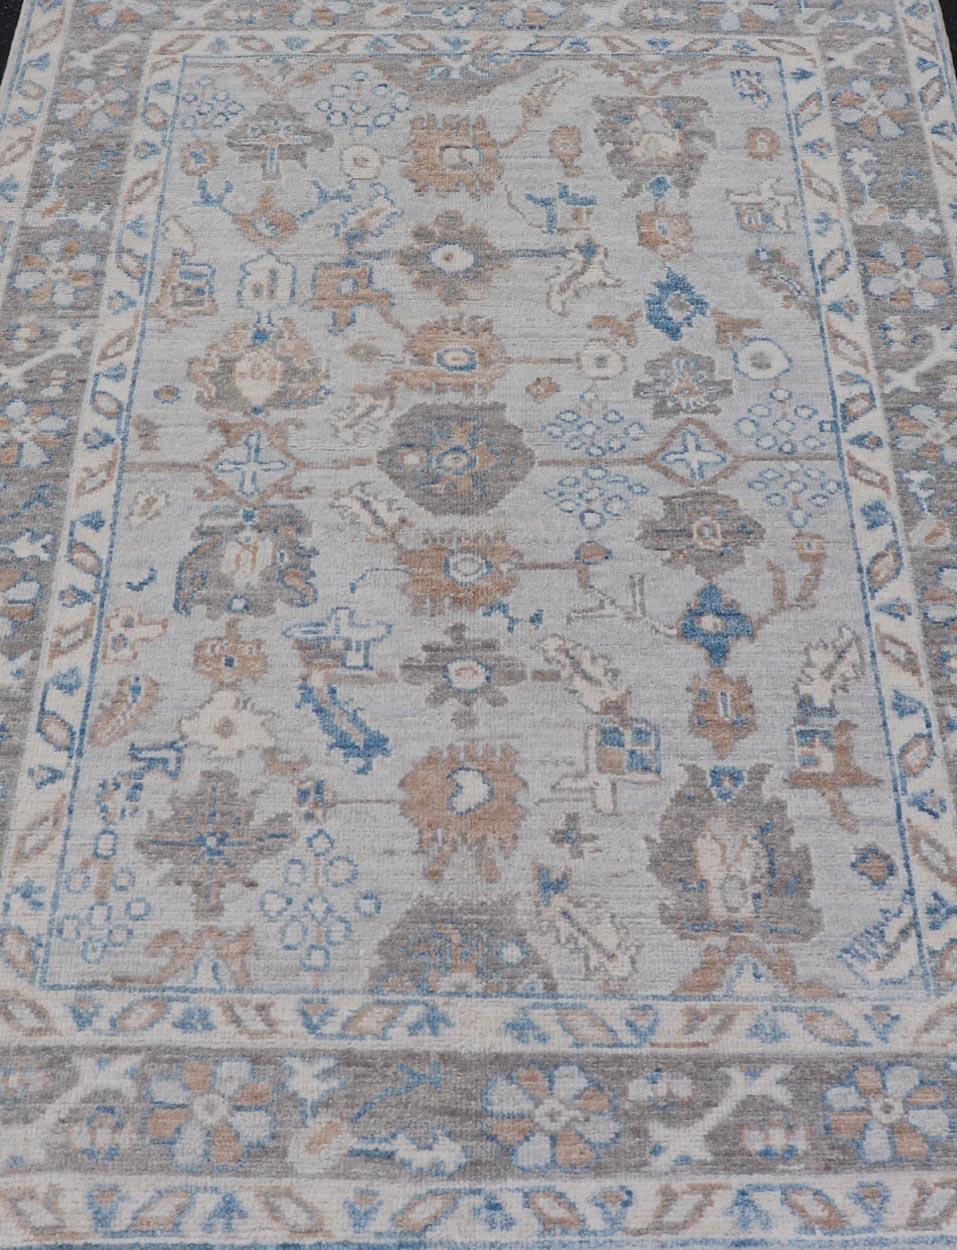 This beautiful Oushak piece starts with a floral border. The field has a modest light blue background with an all-over design rendered with earthy tones, such as wood brown, tawny brown, tans, ivory and hints of blue.  

Measures; 4'1  x 6'3